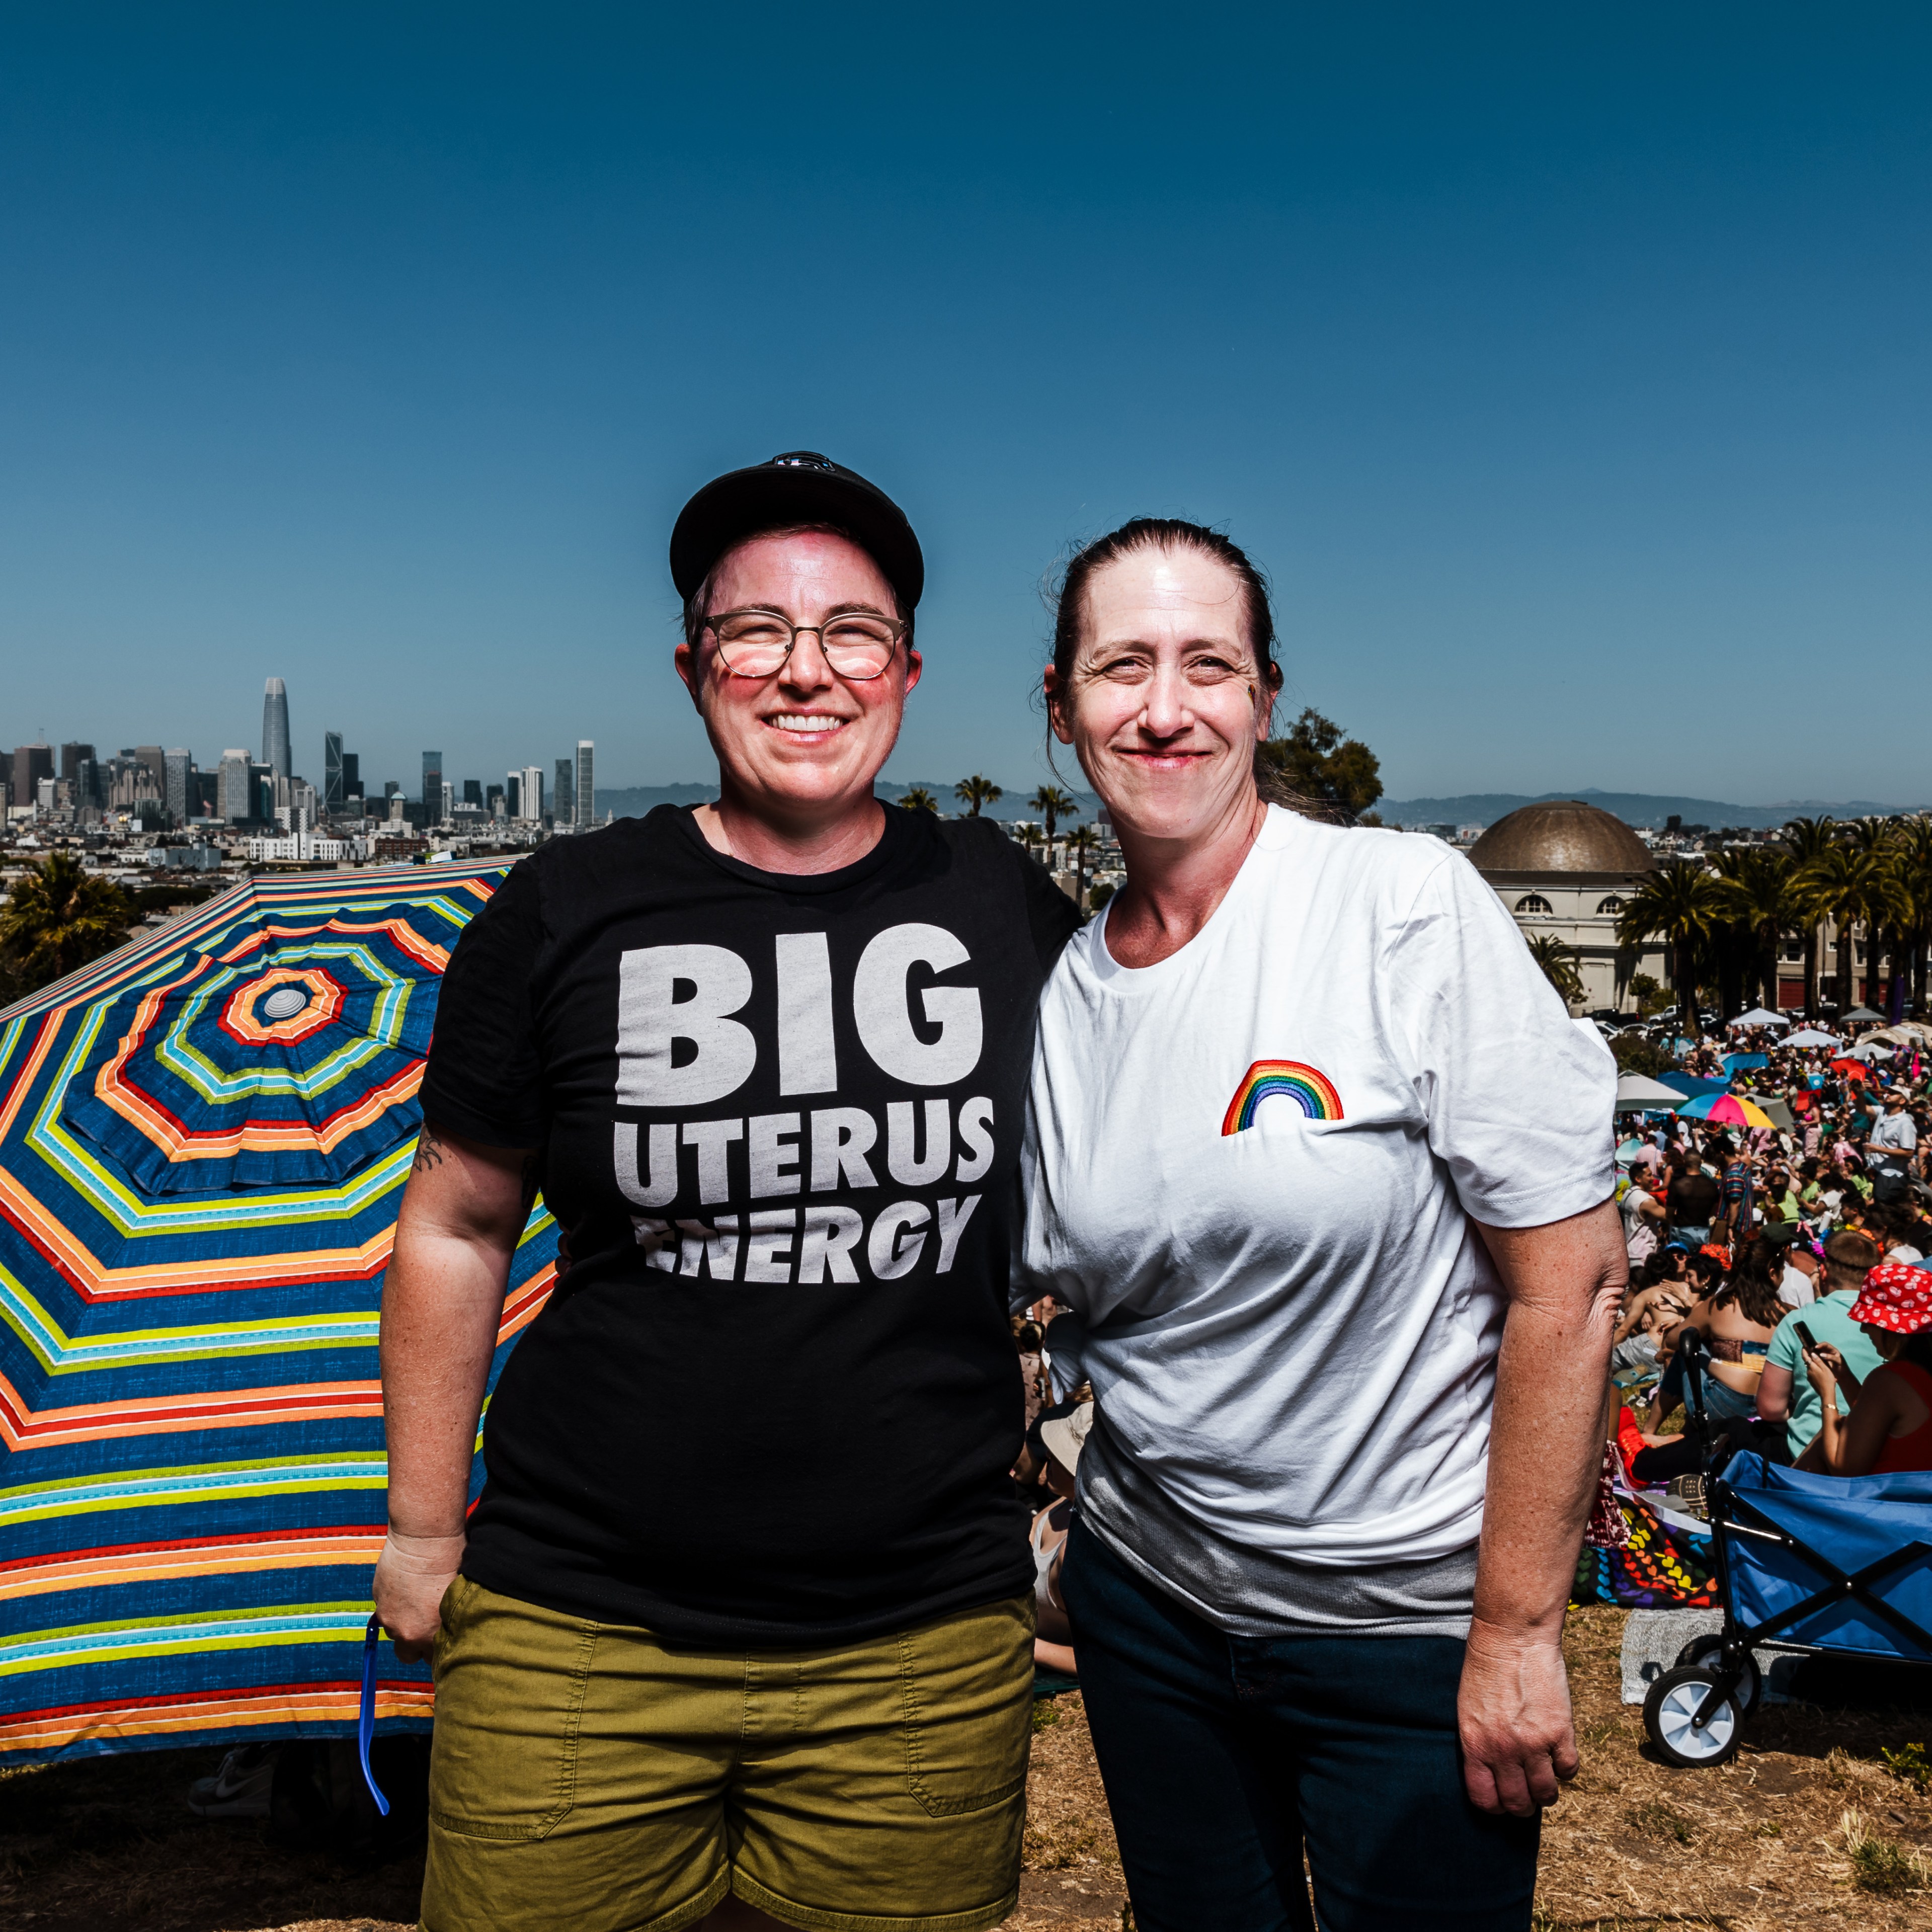 Two people stand smiling in an outdoor setting with a city skyline in the background. One wears a “BIG UTERUS ENERGY” shirt, the other a rainbow t-shirt. A vibrant umbrella and crowd are behind them.